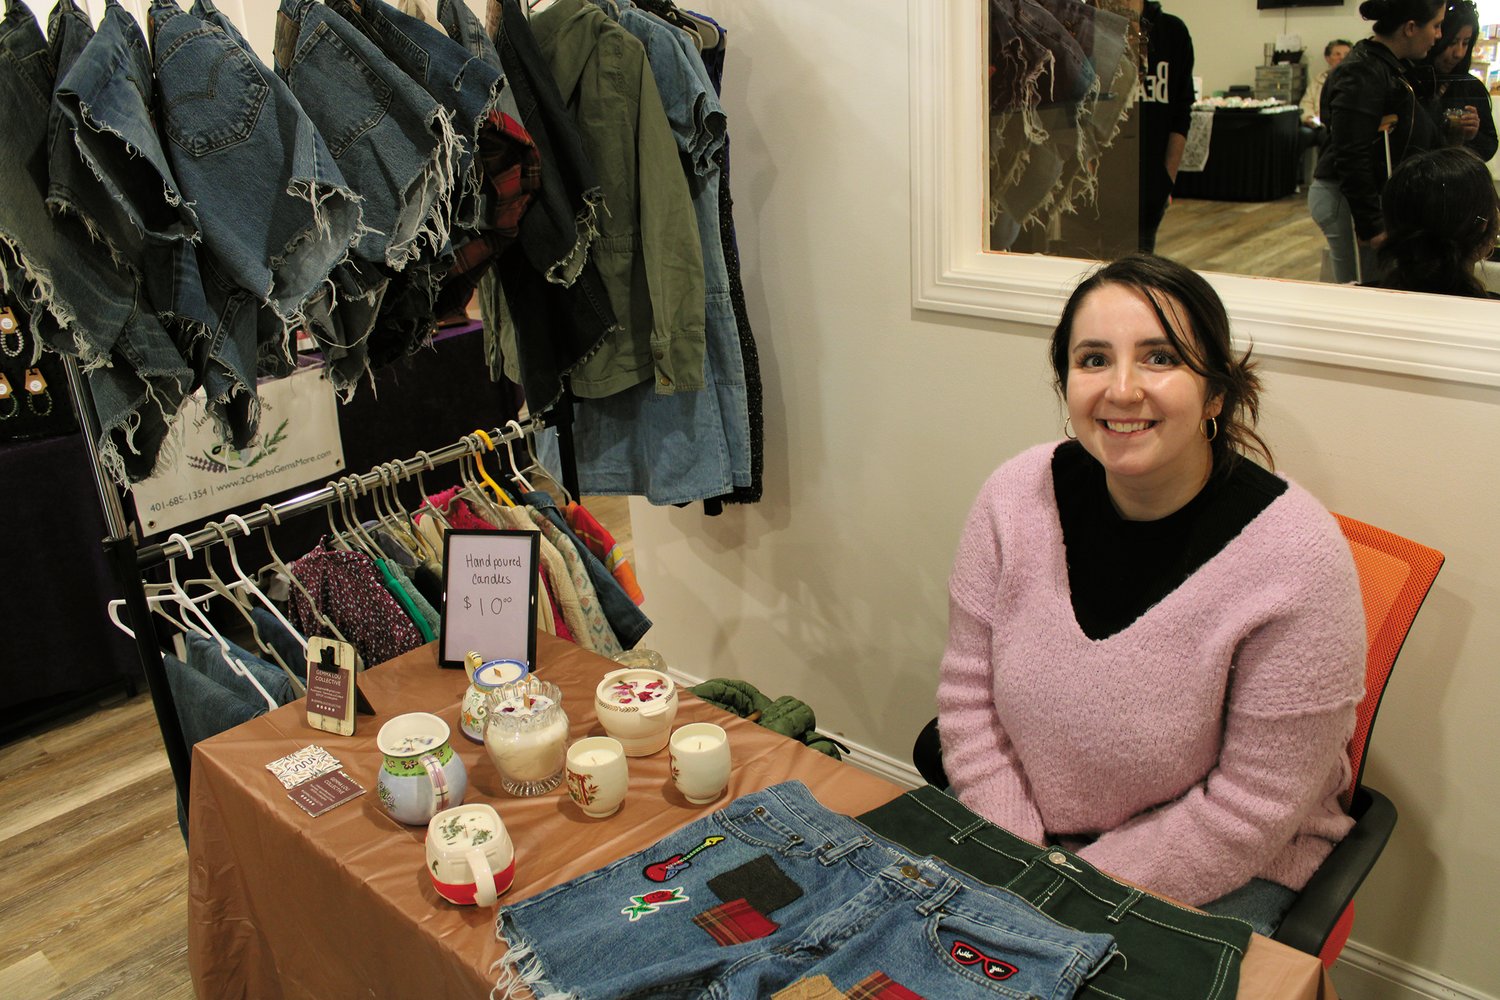 SMILING WITH SUSTAINABLE PRIDE: Caleigh Eleftherion, of the Gemma Lou Collective, shows off her sustainable fashion and candles made with love.